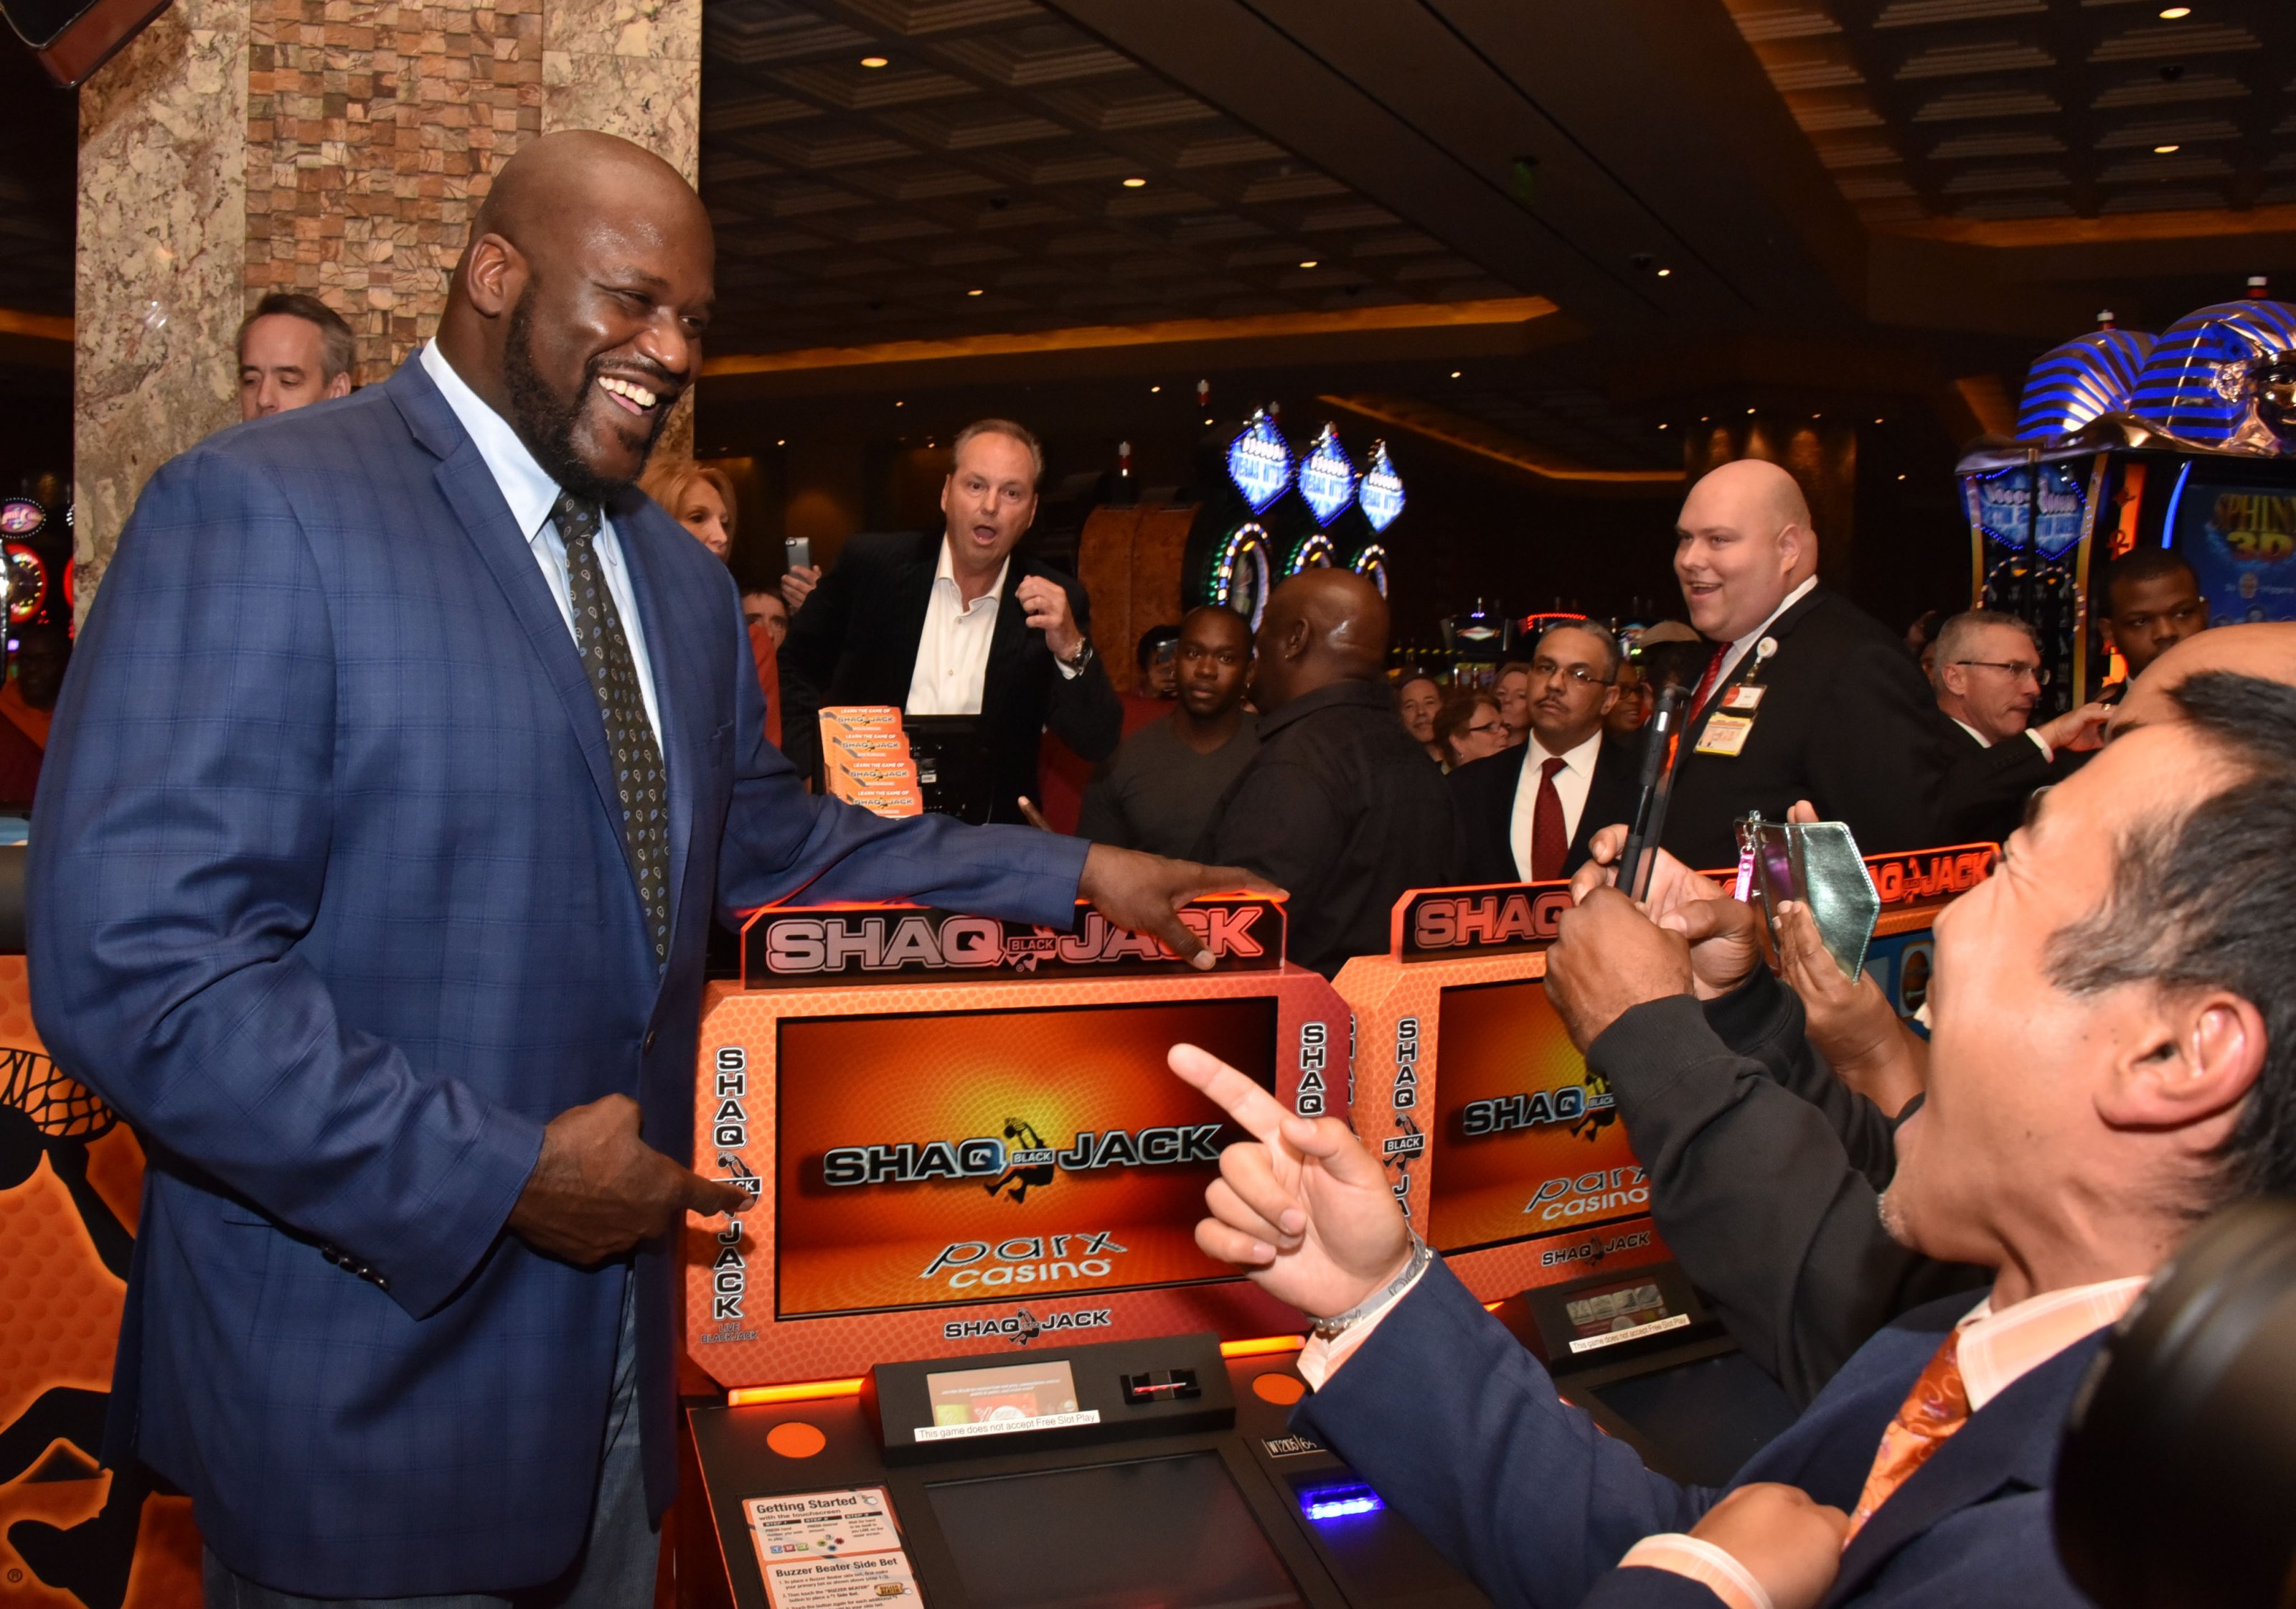 Shaquille O'Neal debuts ShaqBLACKJack at Parx Casino

Featuring: Shaquille O'Neal
Where: Bensalem, Pennsylvania, United States
When: 05 Oct 2015
Credit: Hugh Dillon/WENN.com